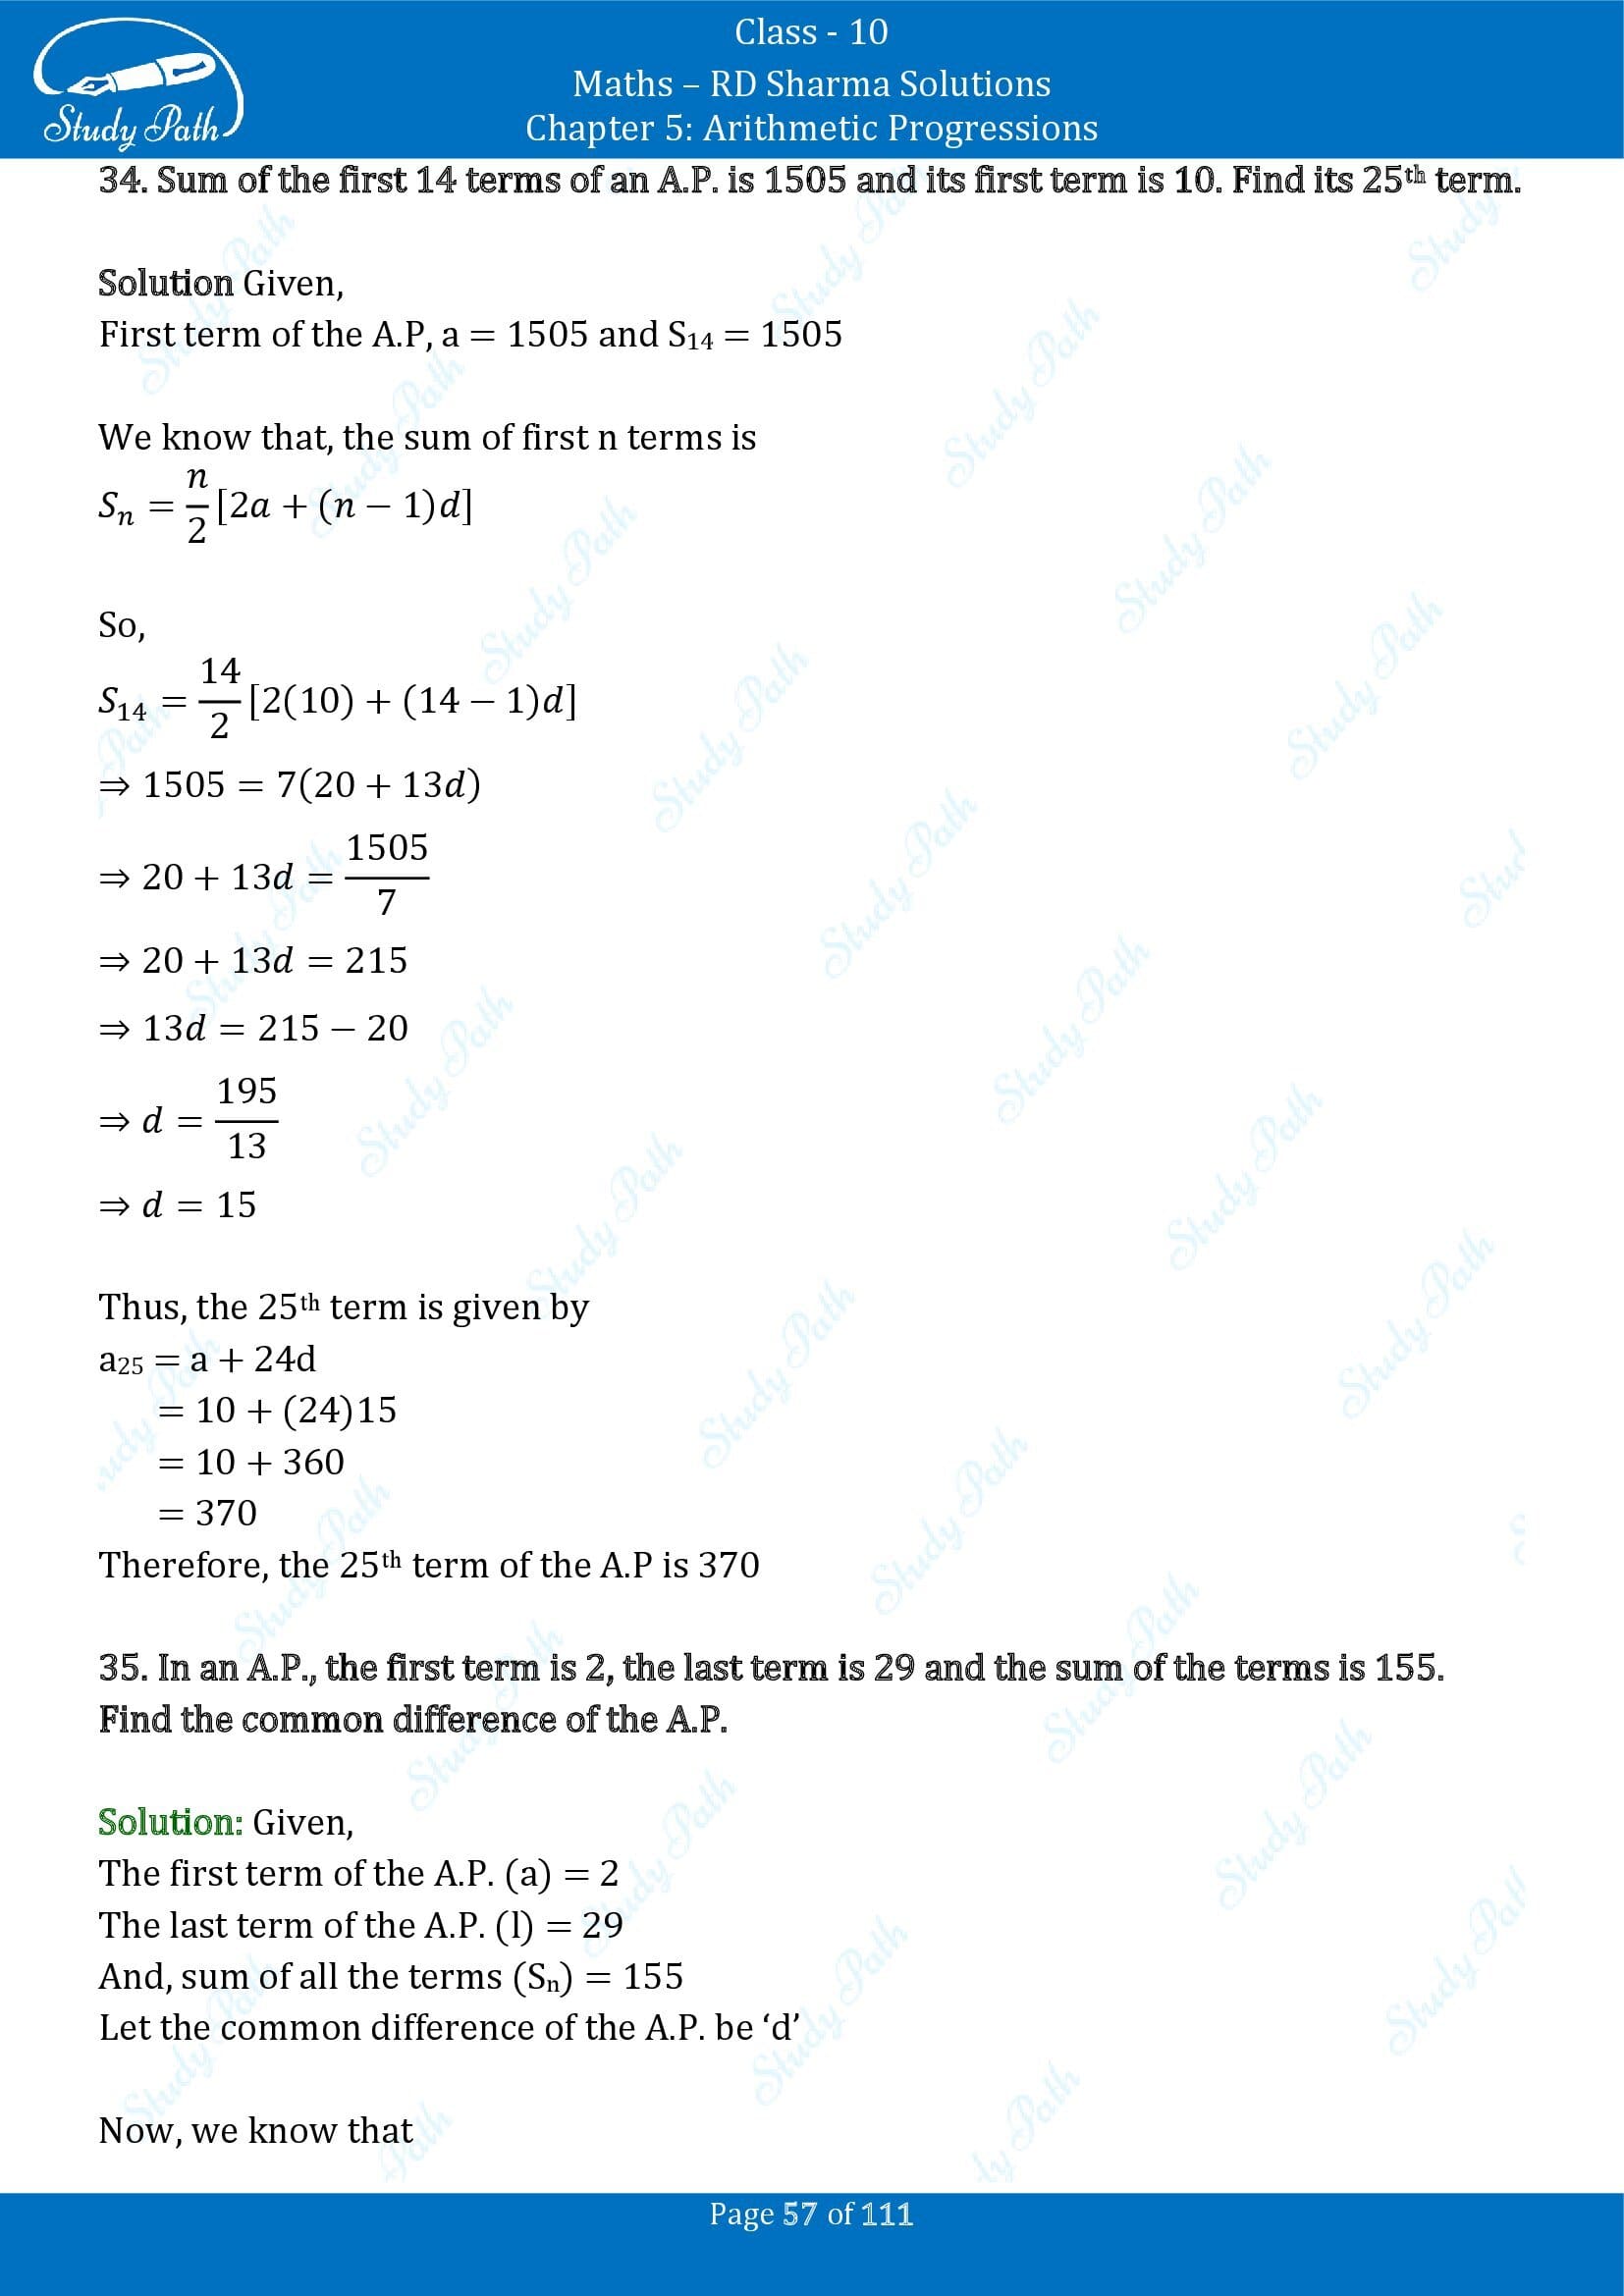 RD Sharma Solutions Class 10 Chapter 5 Arithmetic Progressions Exercise 5.6 00057